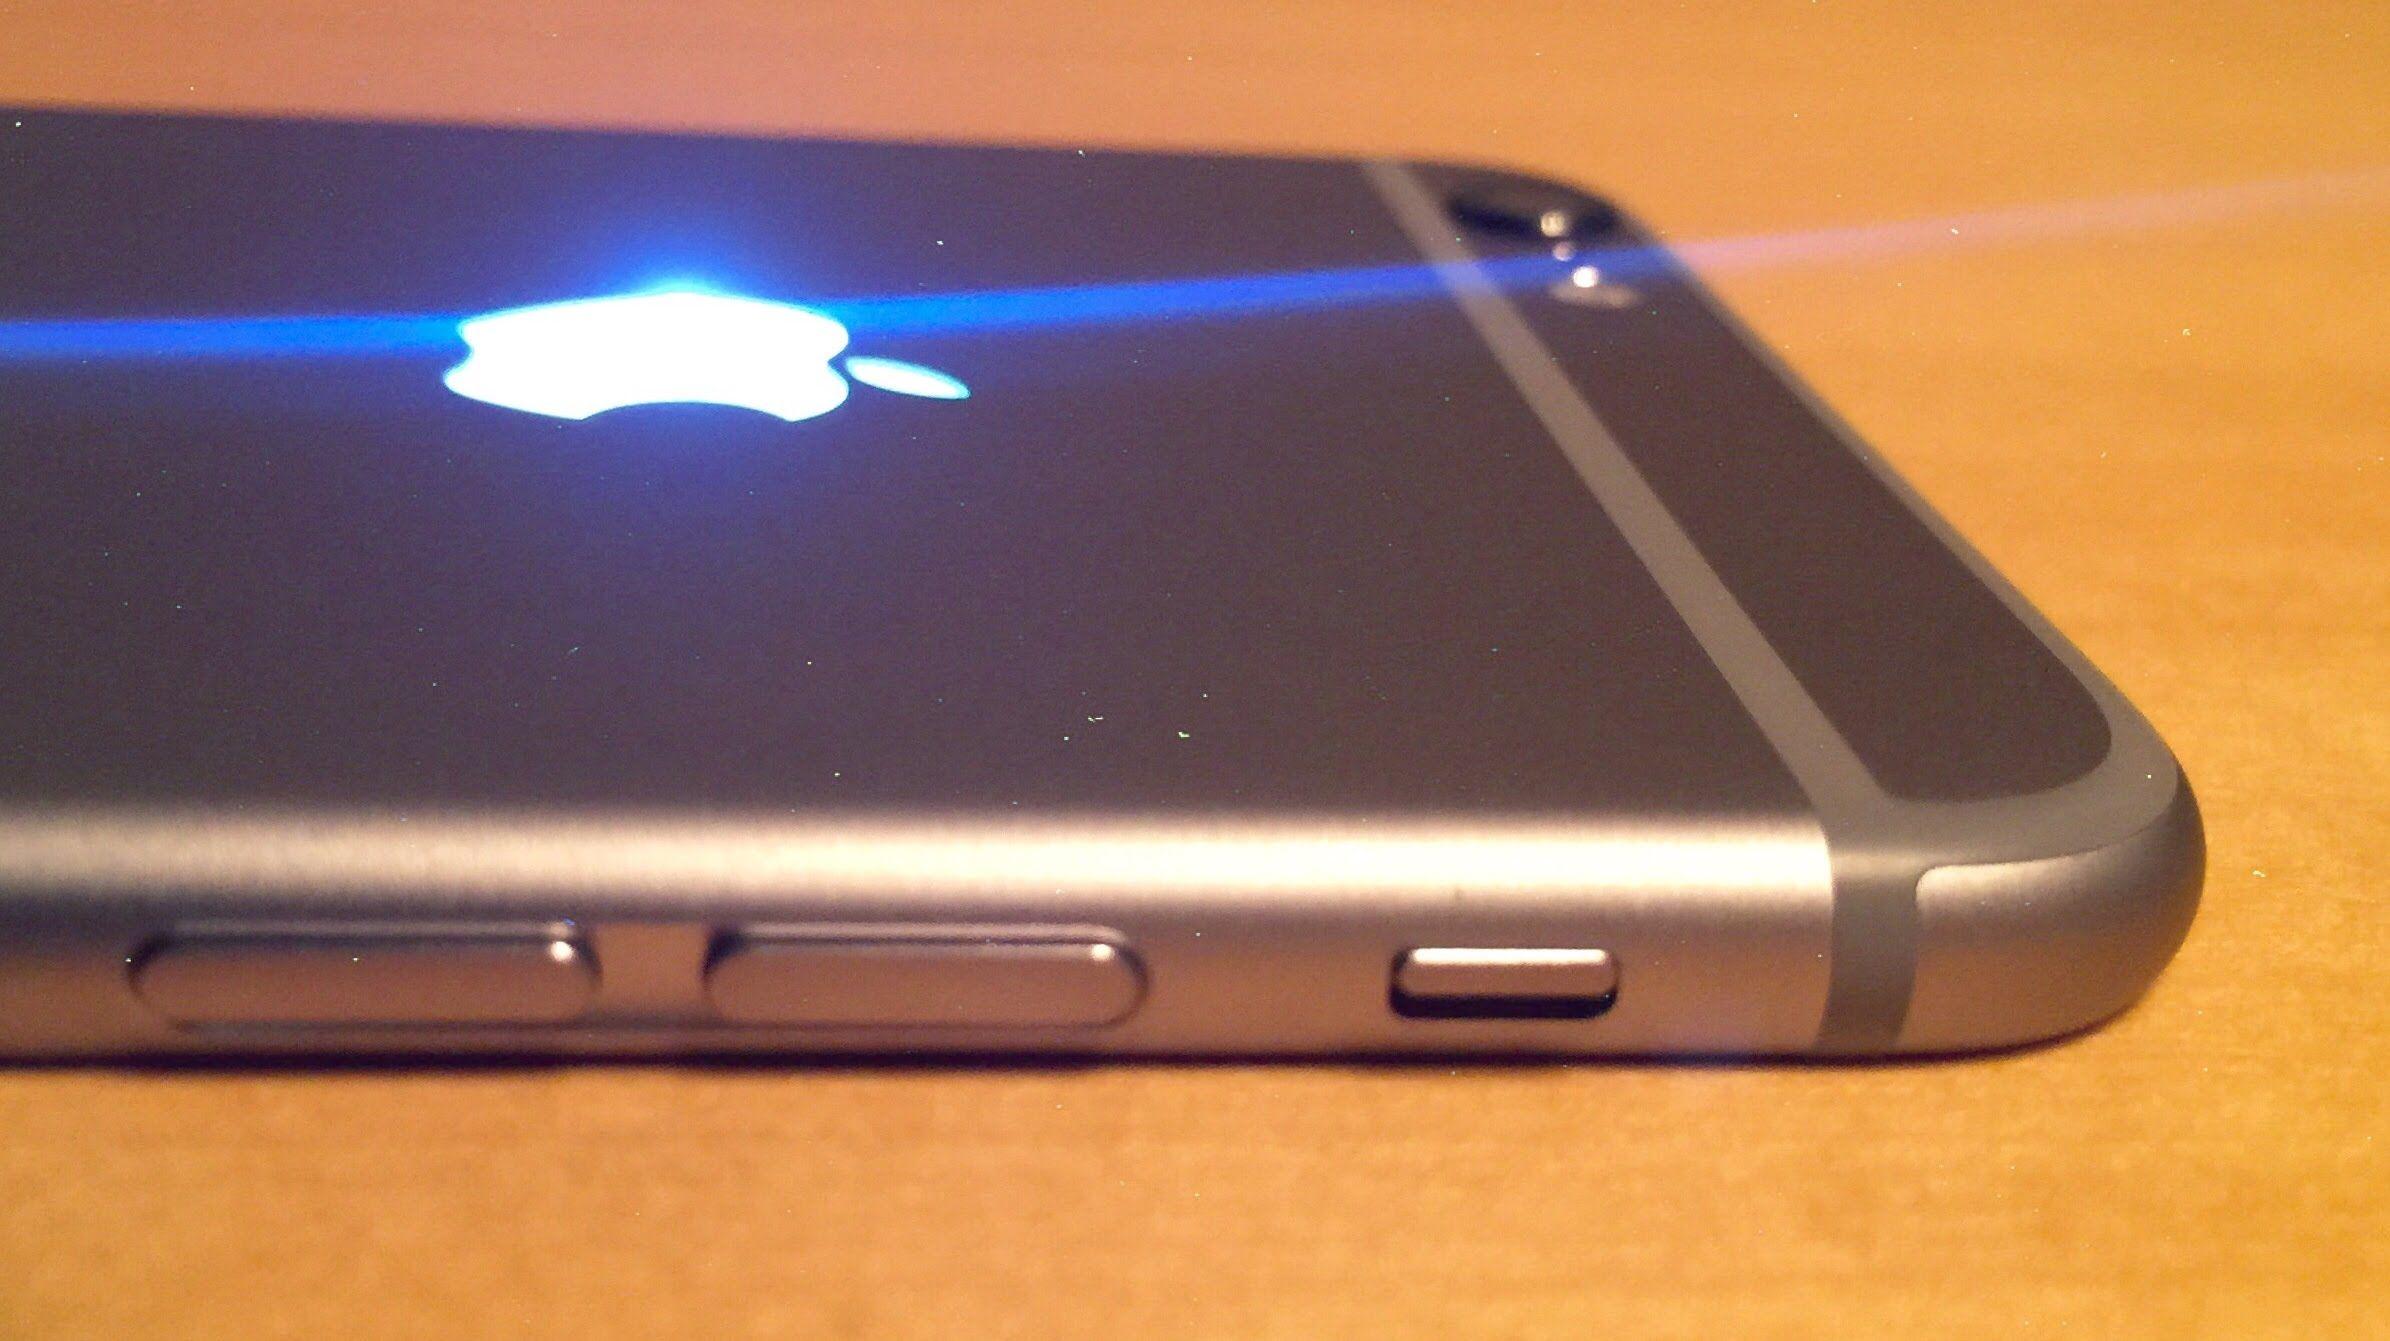 Glowing Beats Logo - How to install a glowing Apple logo on iPhone 6s